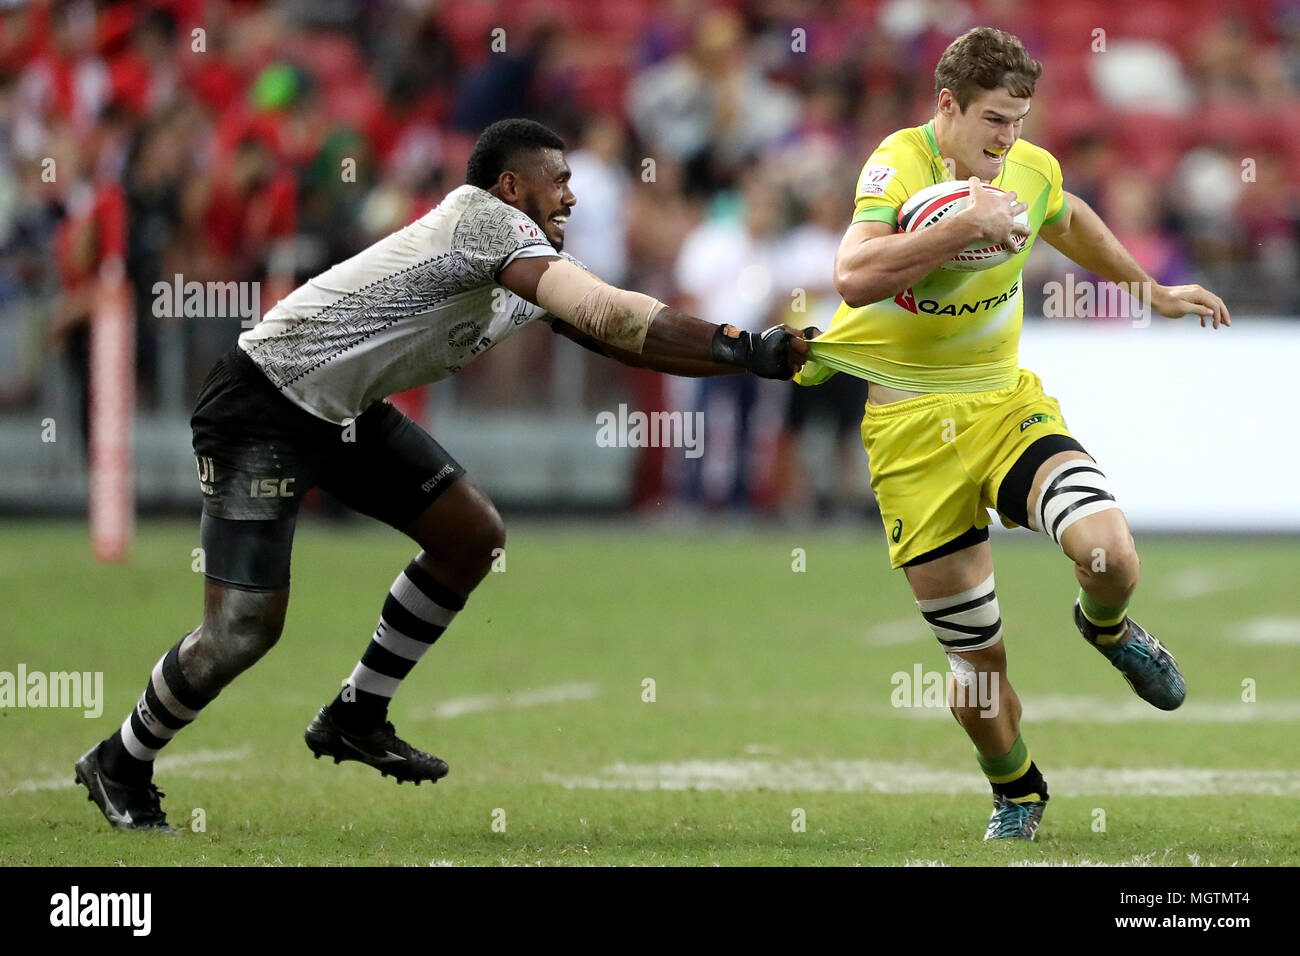 Singapore. 29th Apr, 2018. Tim Anstee (right) of Australia is tackled by Kalione Nasoko of Fiji during the Cup Final match between Fiji and Australia at the Rugby Sevens tournament at the National Stadium. Singapore. Credit: Paul Miller/ZUMA Wire/Alamy Live News Stock Photo